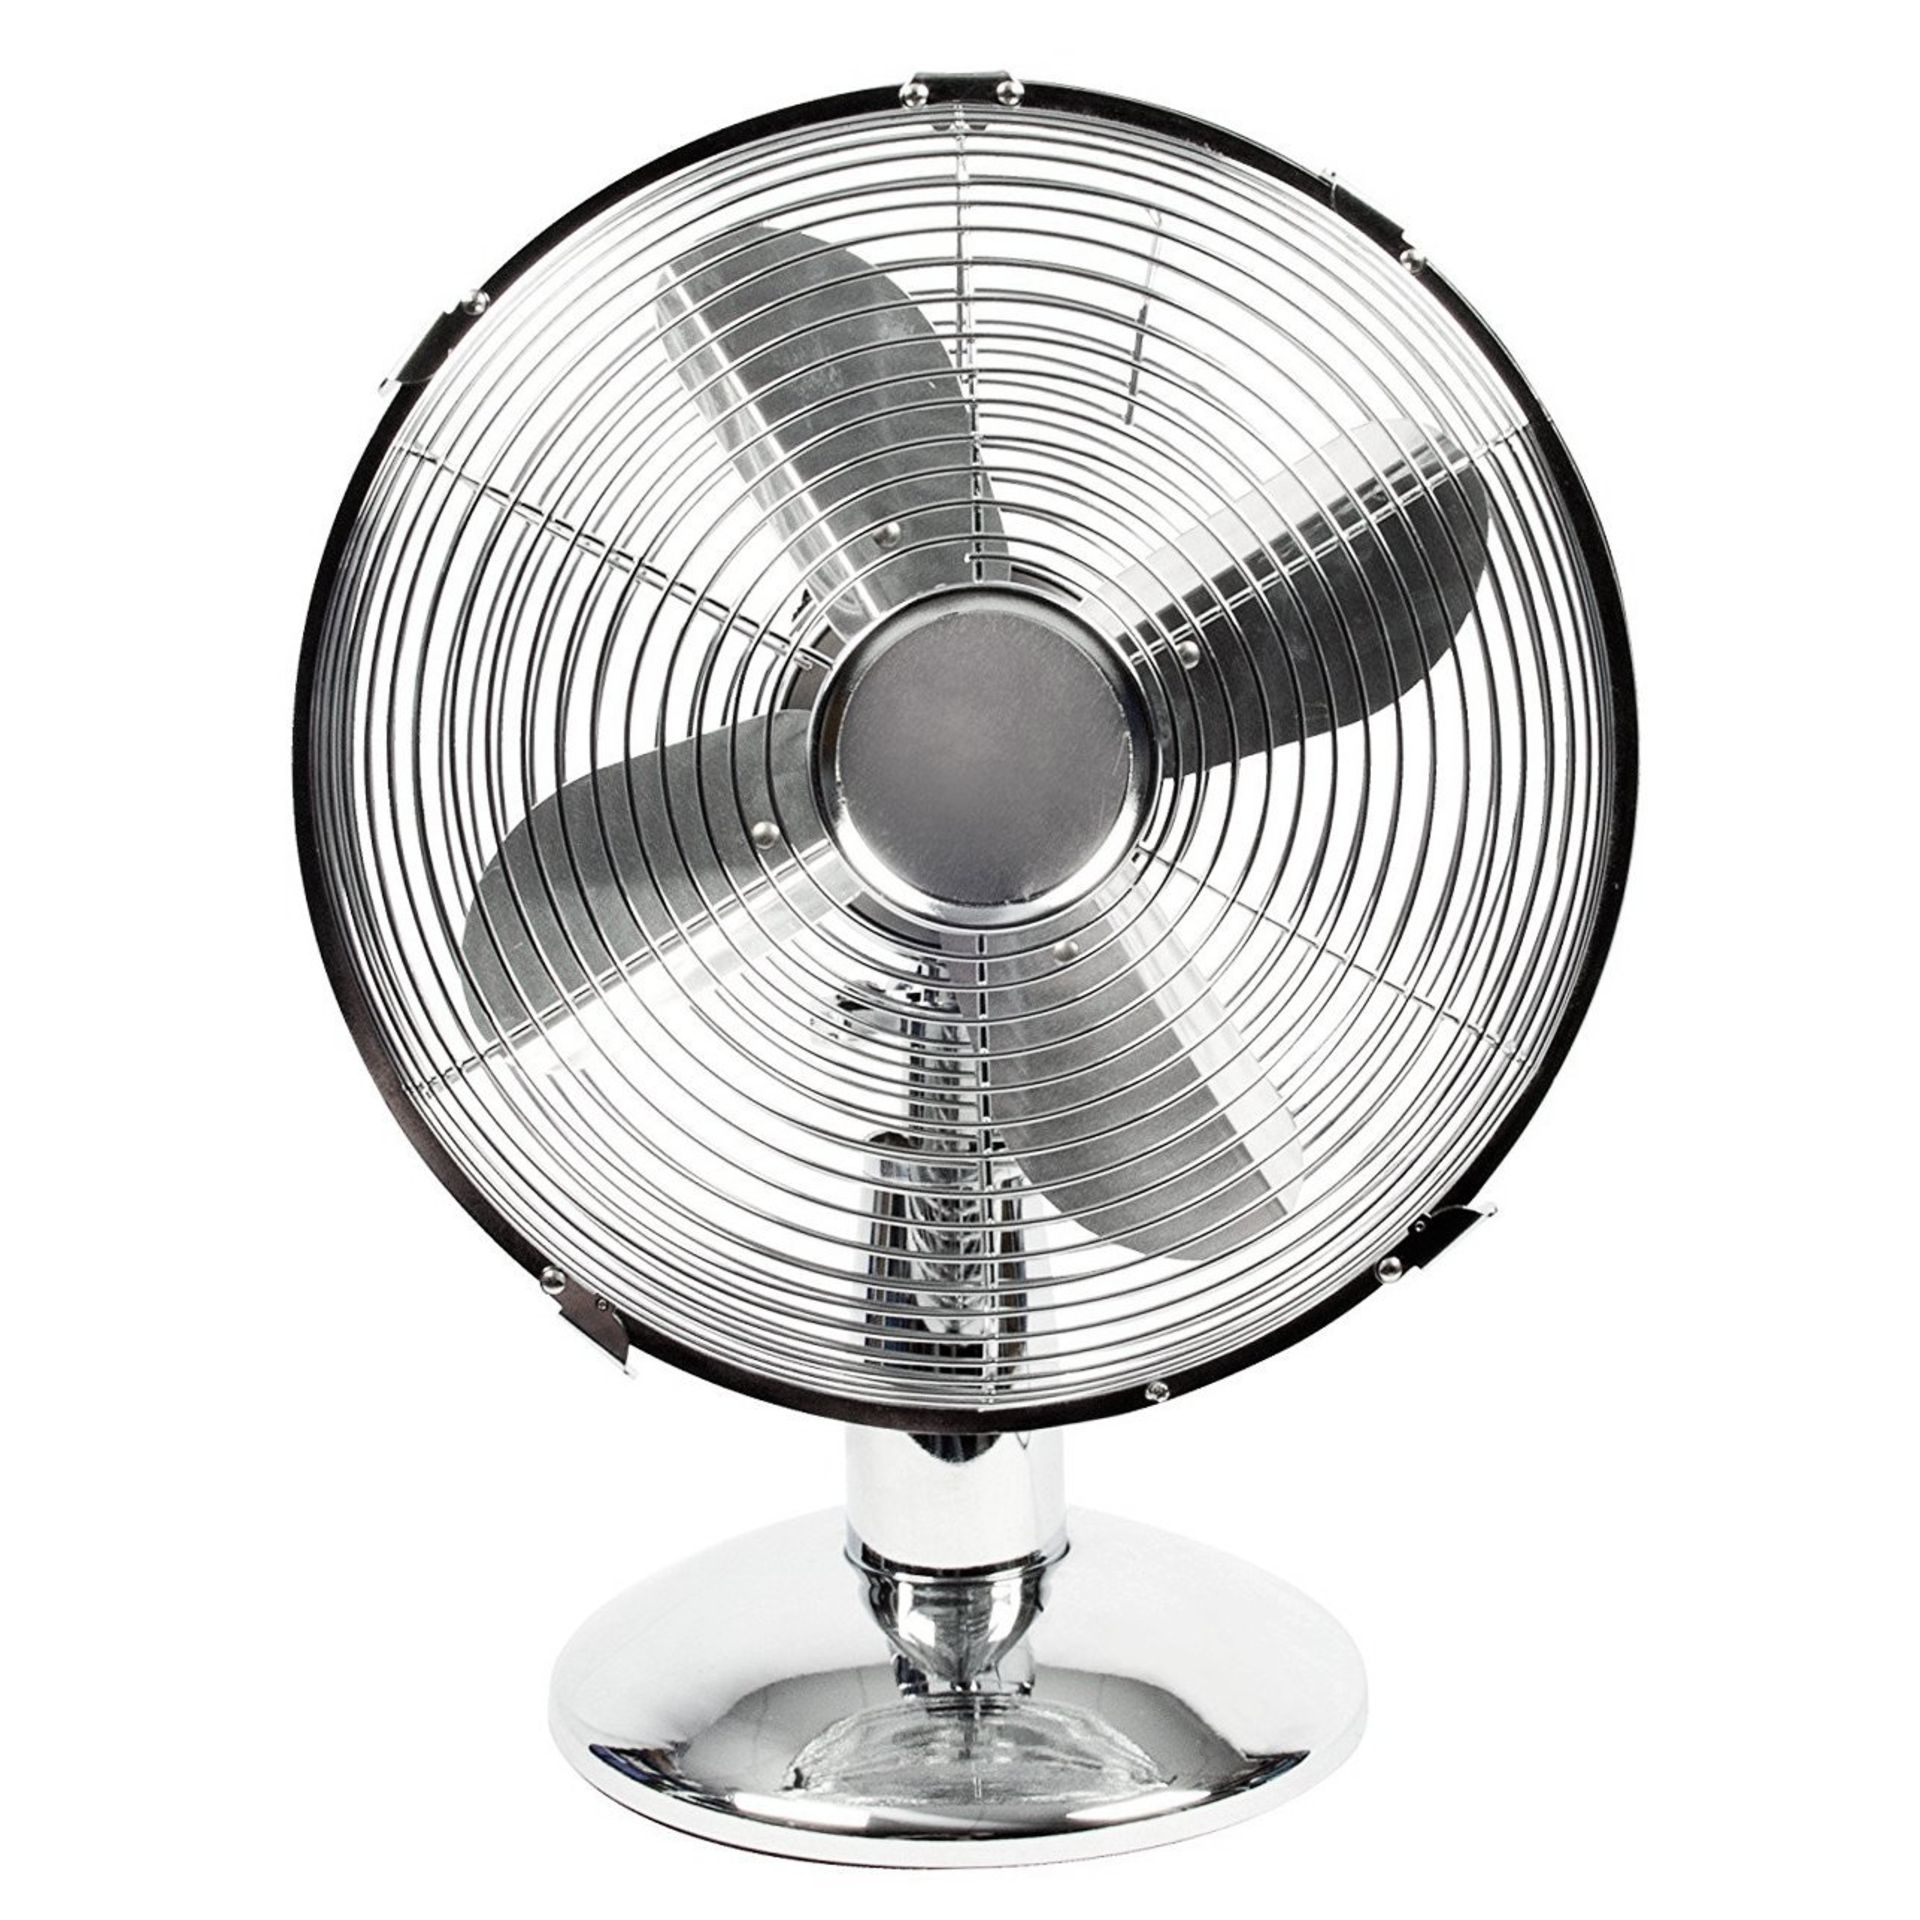 (RU11) 12" Inch Chrome Metal 3 Speed Desk Fan Oscillating Stay cool this year with the des... - Image 2 of 2